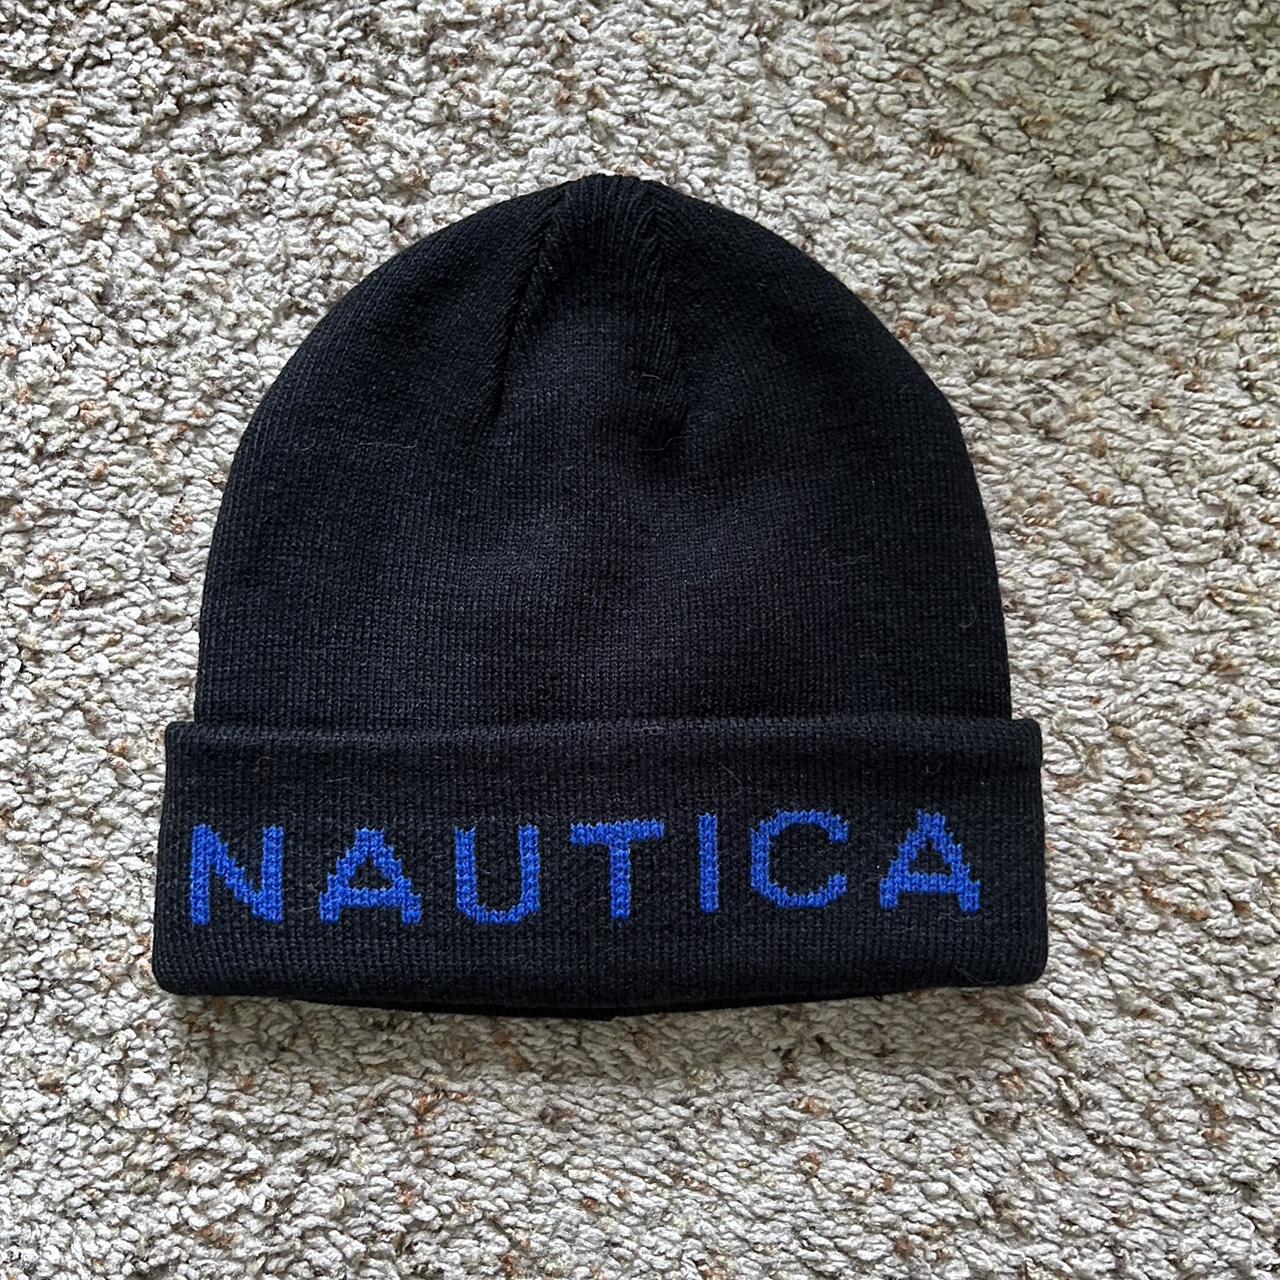 NAUTICA New With Tags SAVANNAH Quilted Euro - Depop